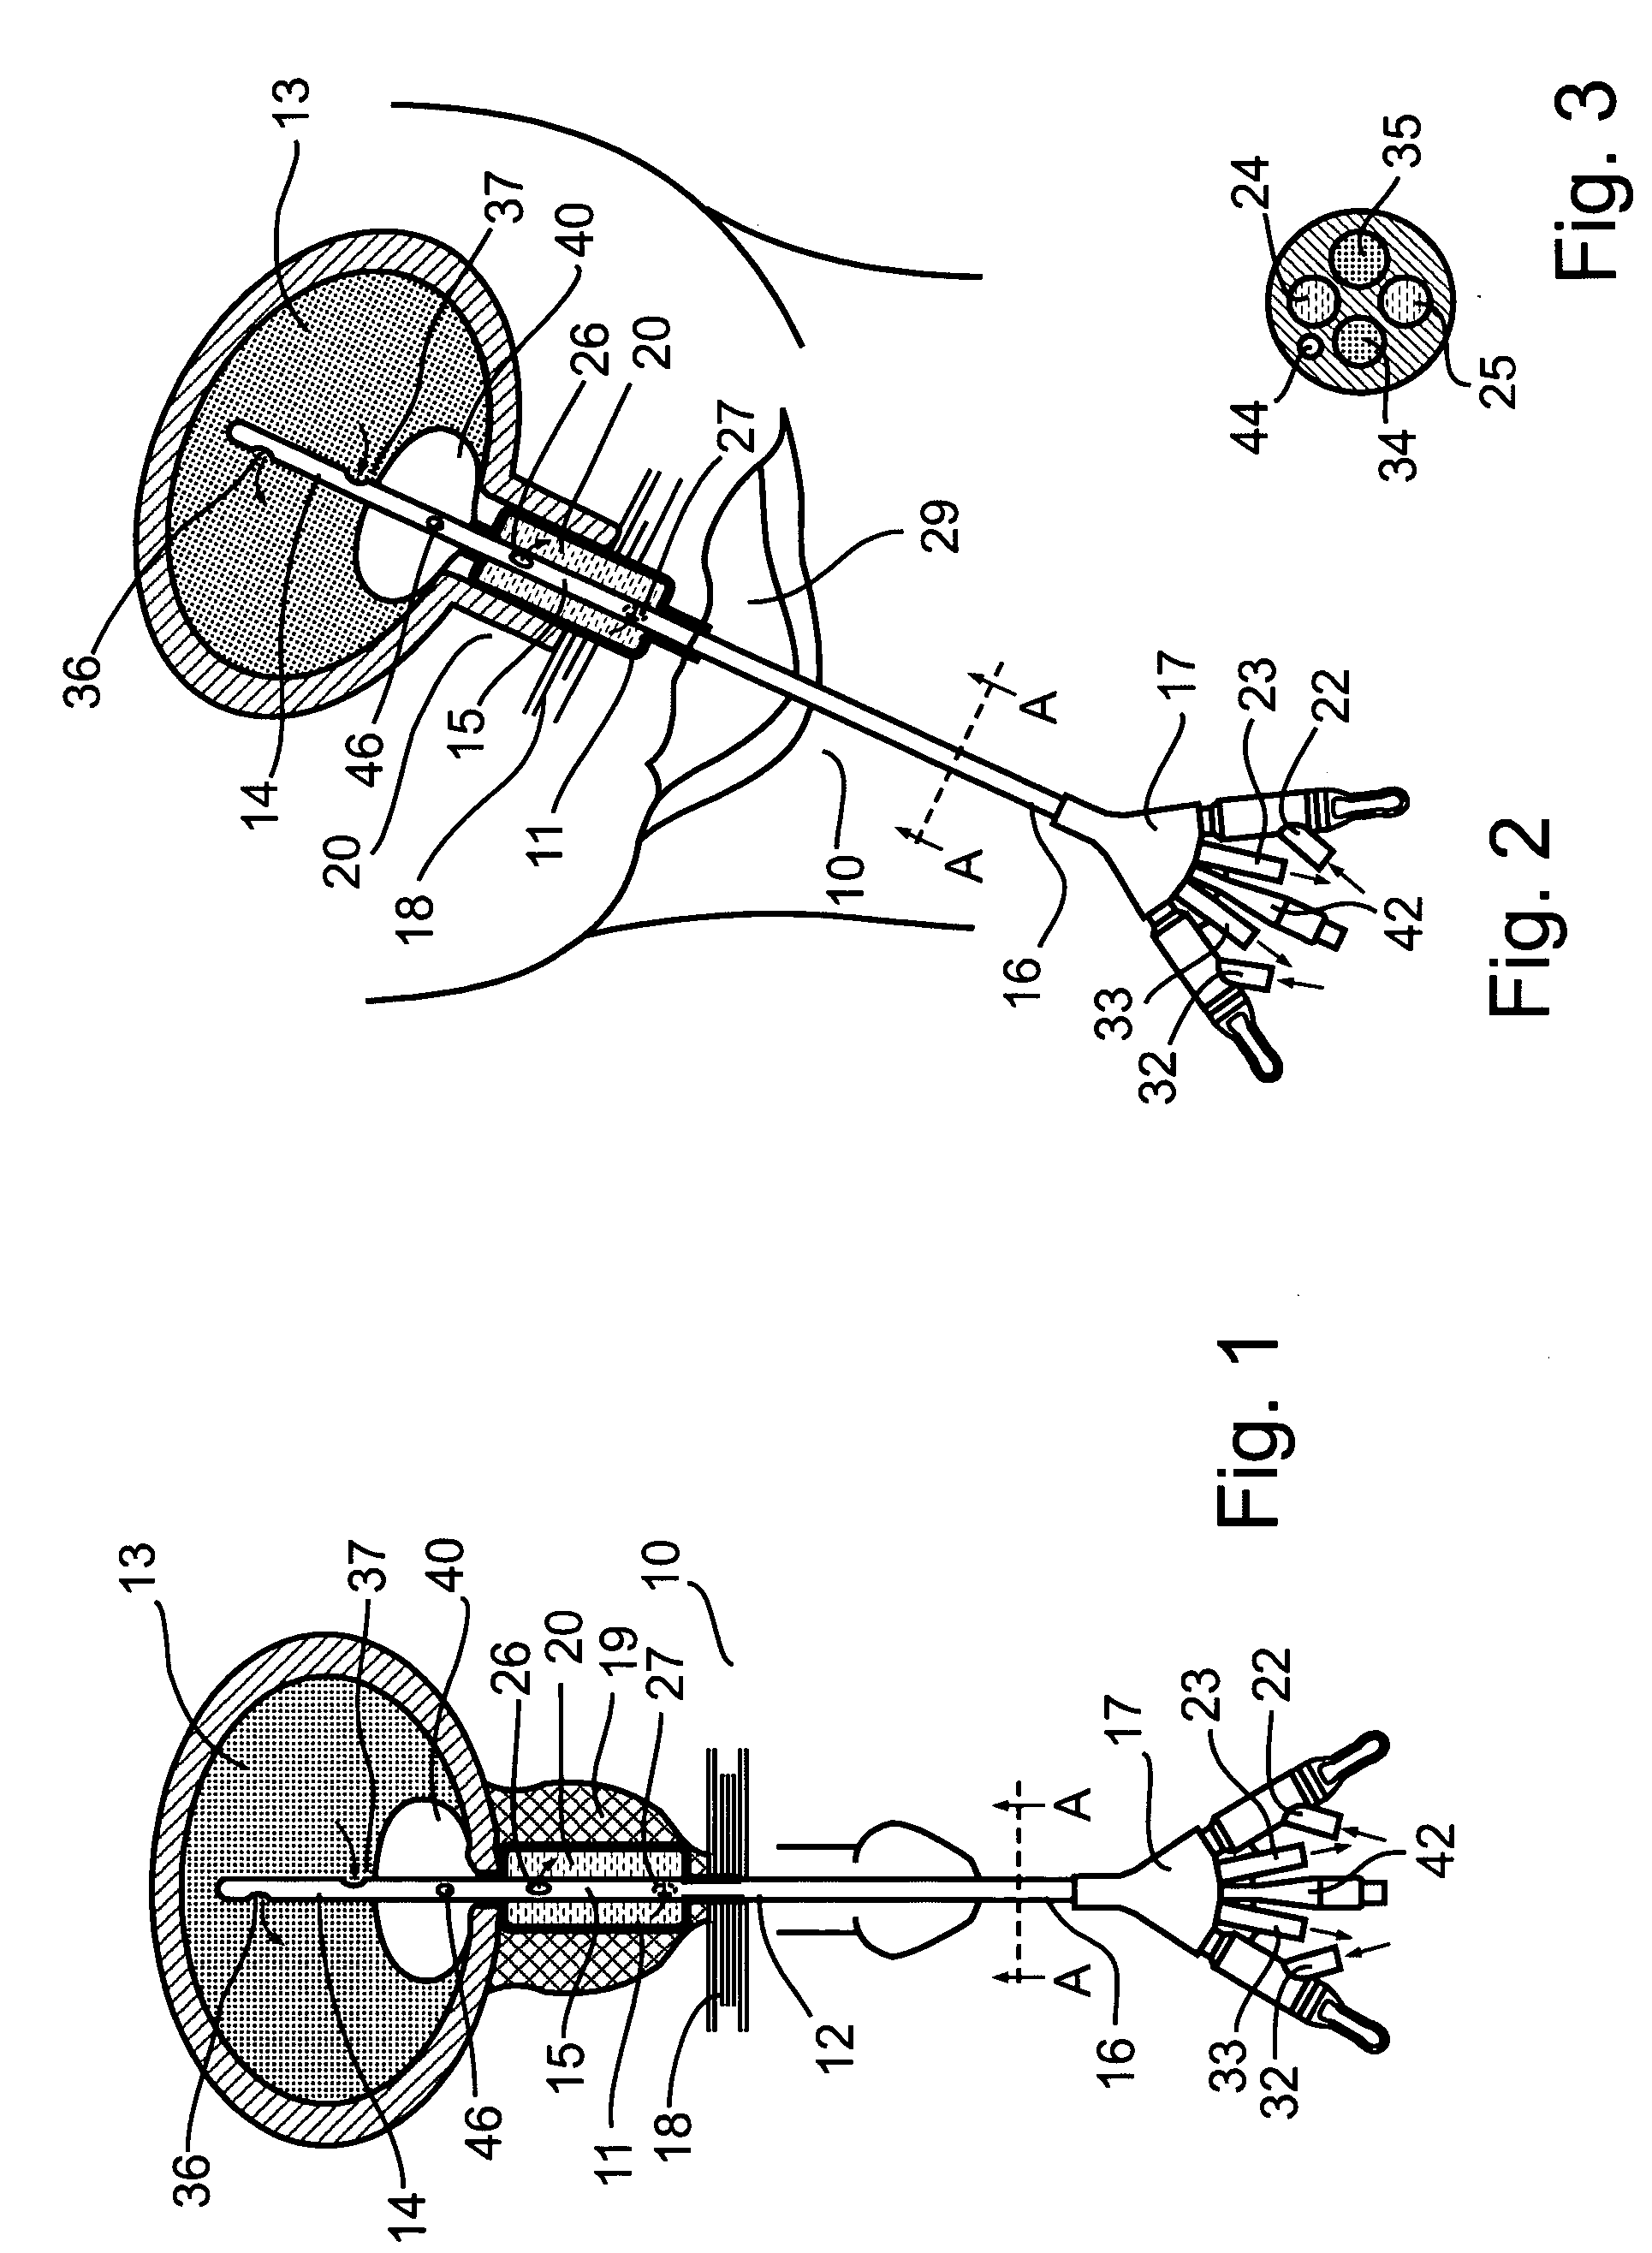 System and method for treating urinary tract disorders